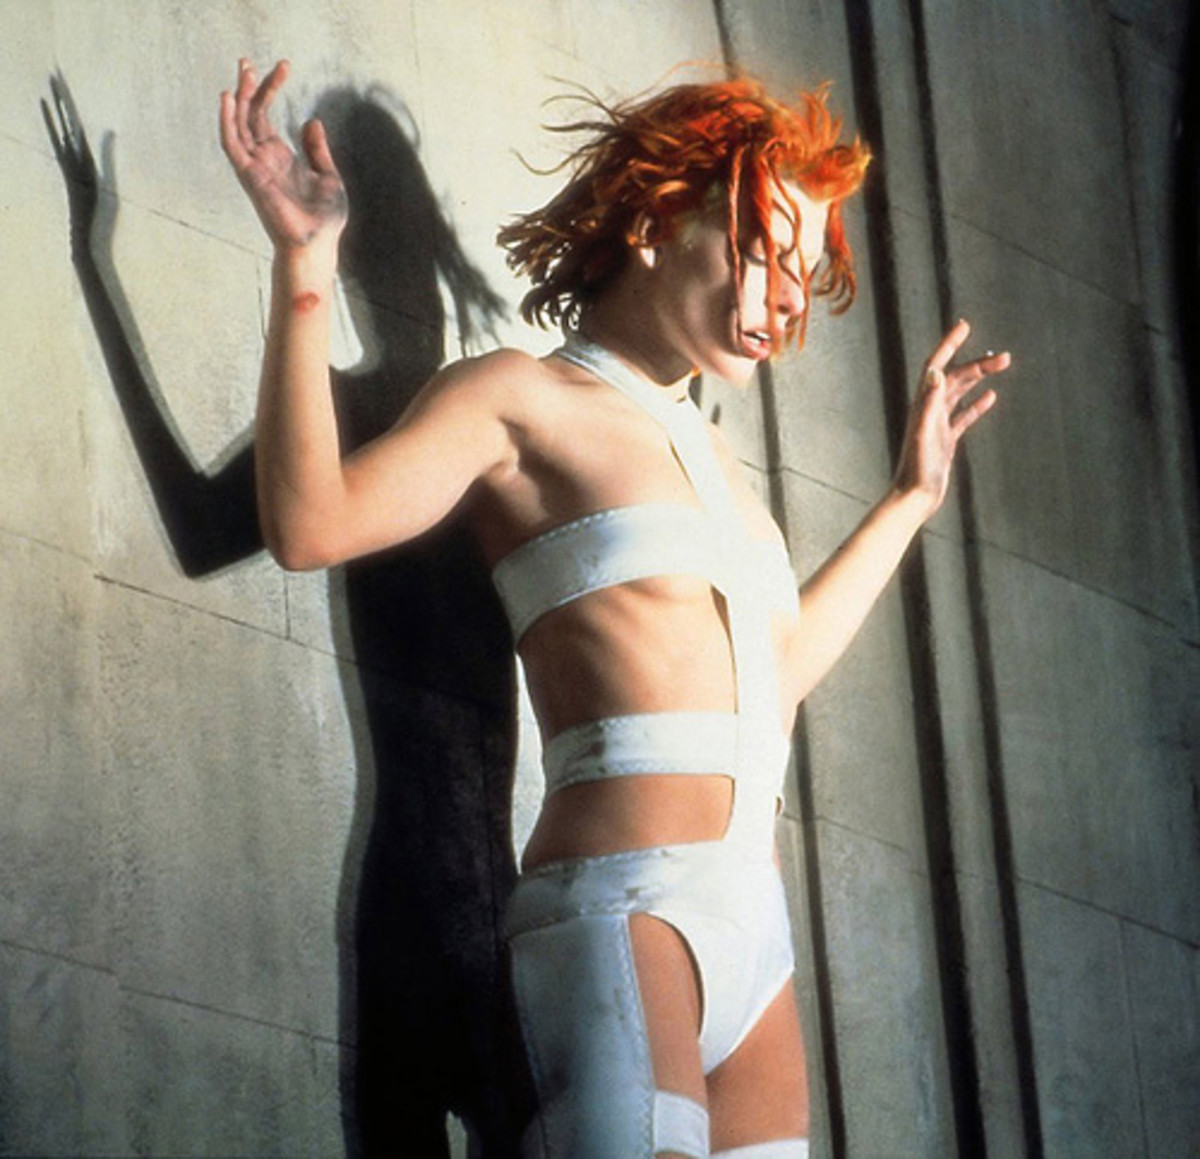 Milla Jovovich as Leeloo in the Fifth Element